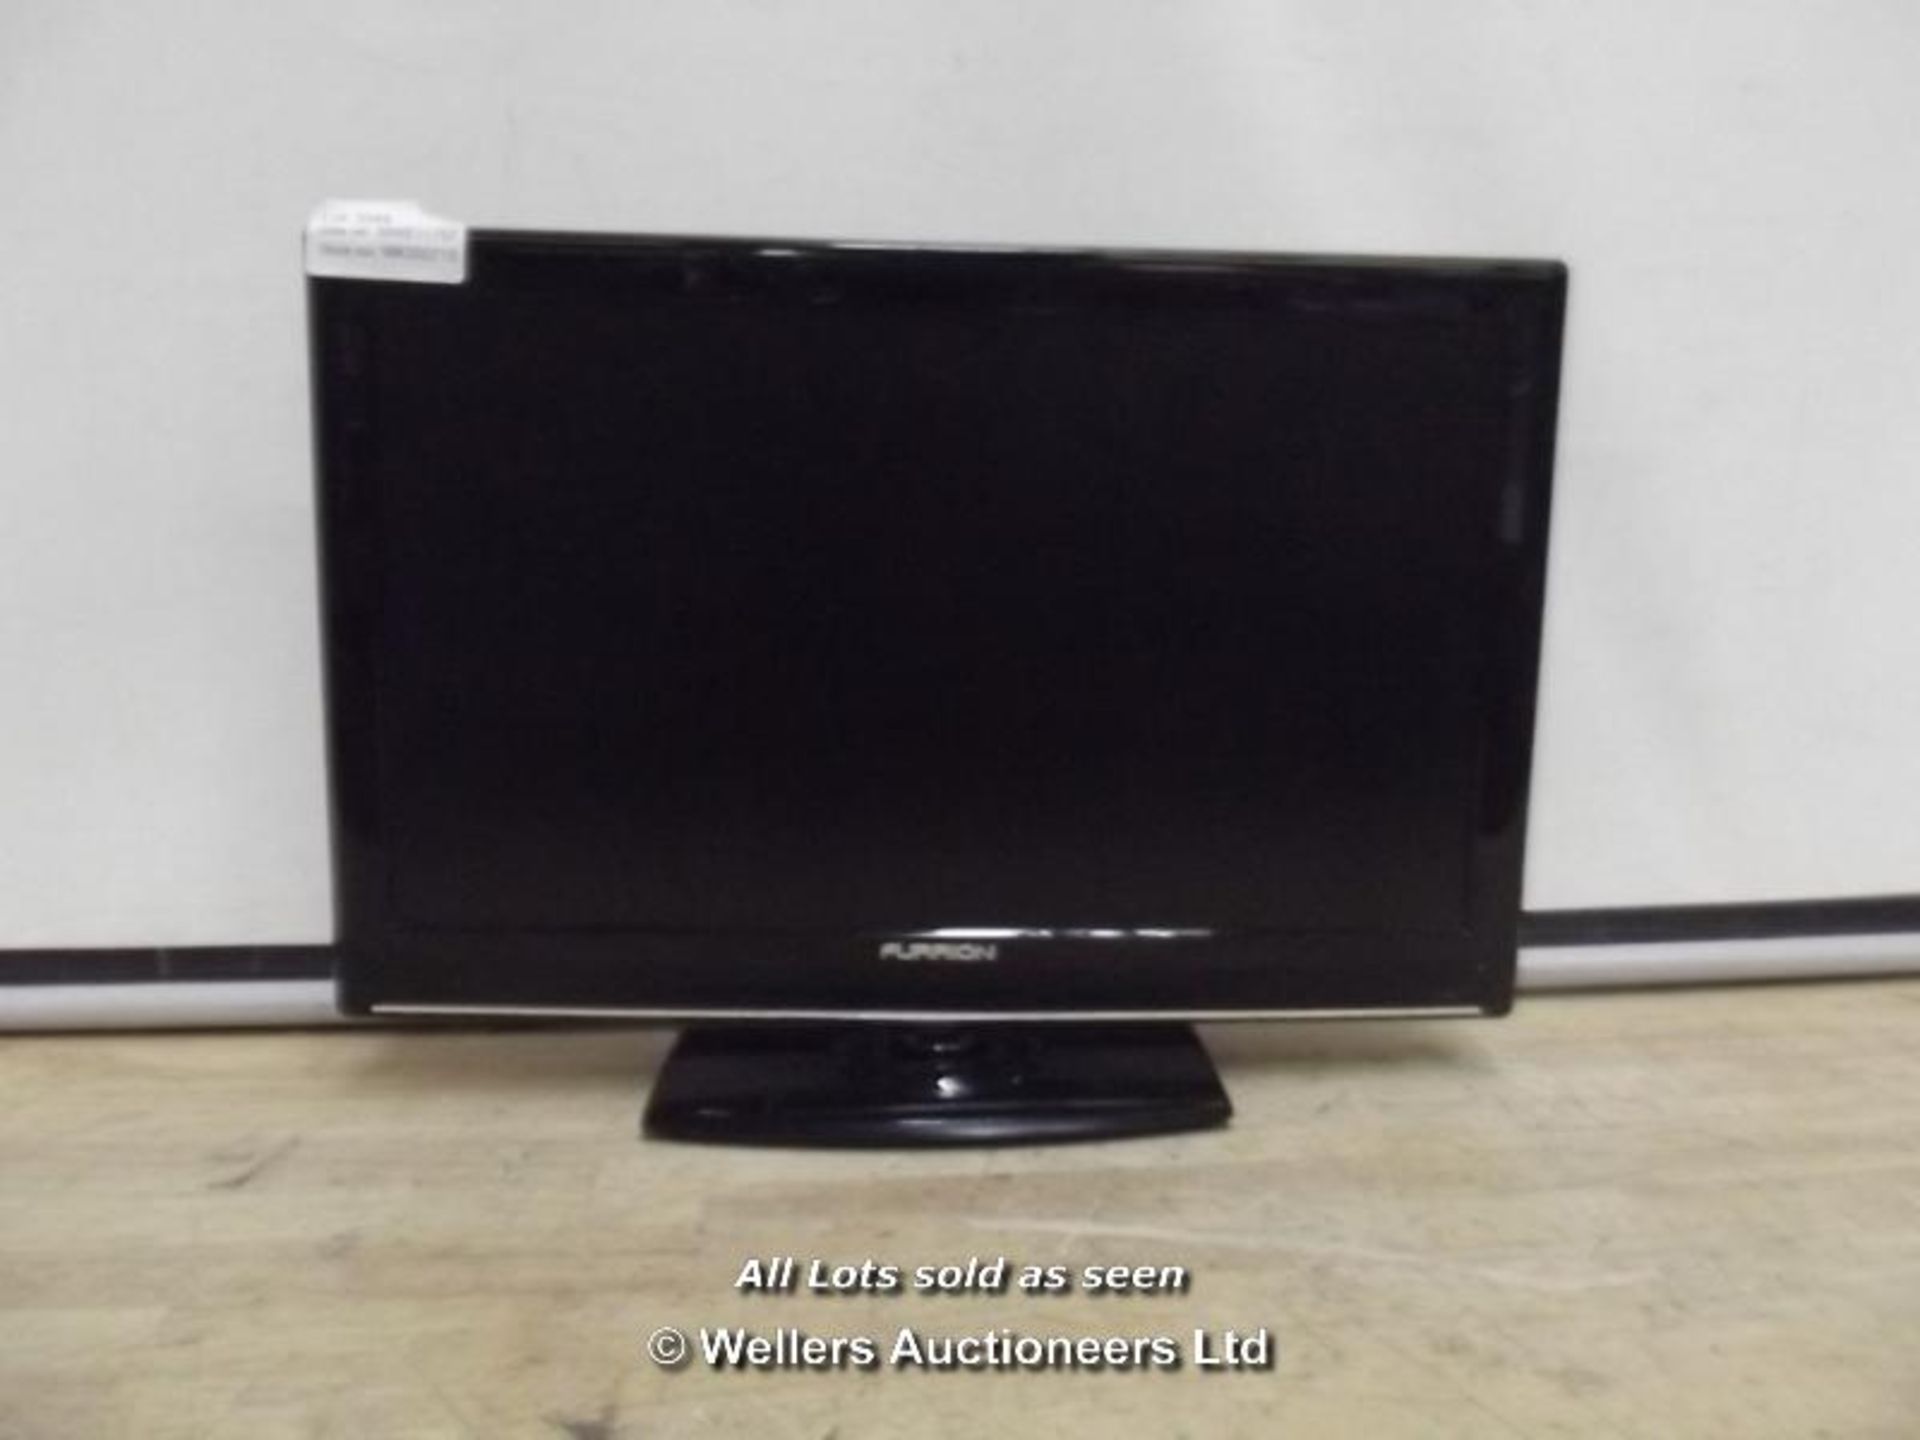 FURRION 22" FULL HD TV WITH IN BUILT DVD PLAYER / GRADE: RETURNS / BOXED (DC4) [MK290715]